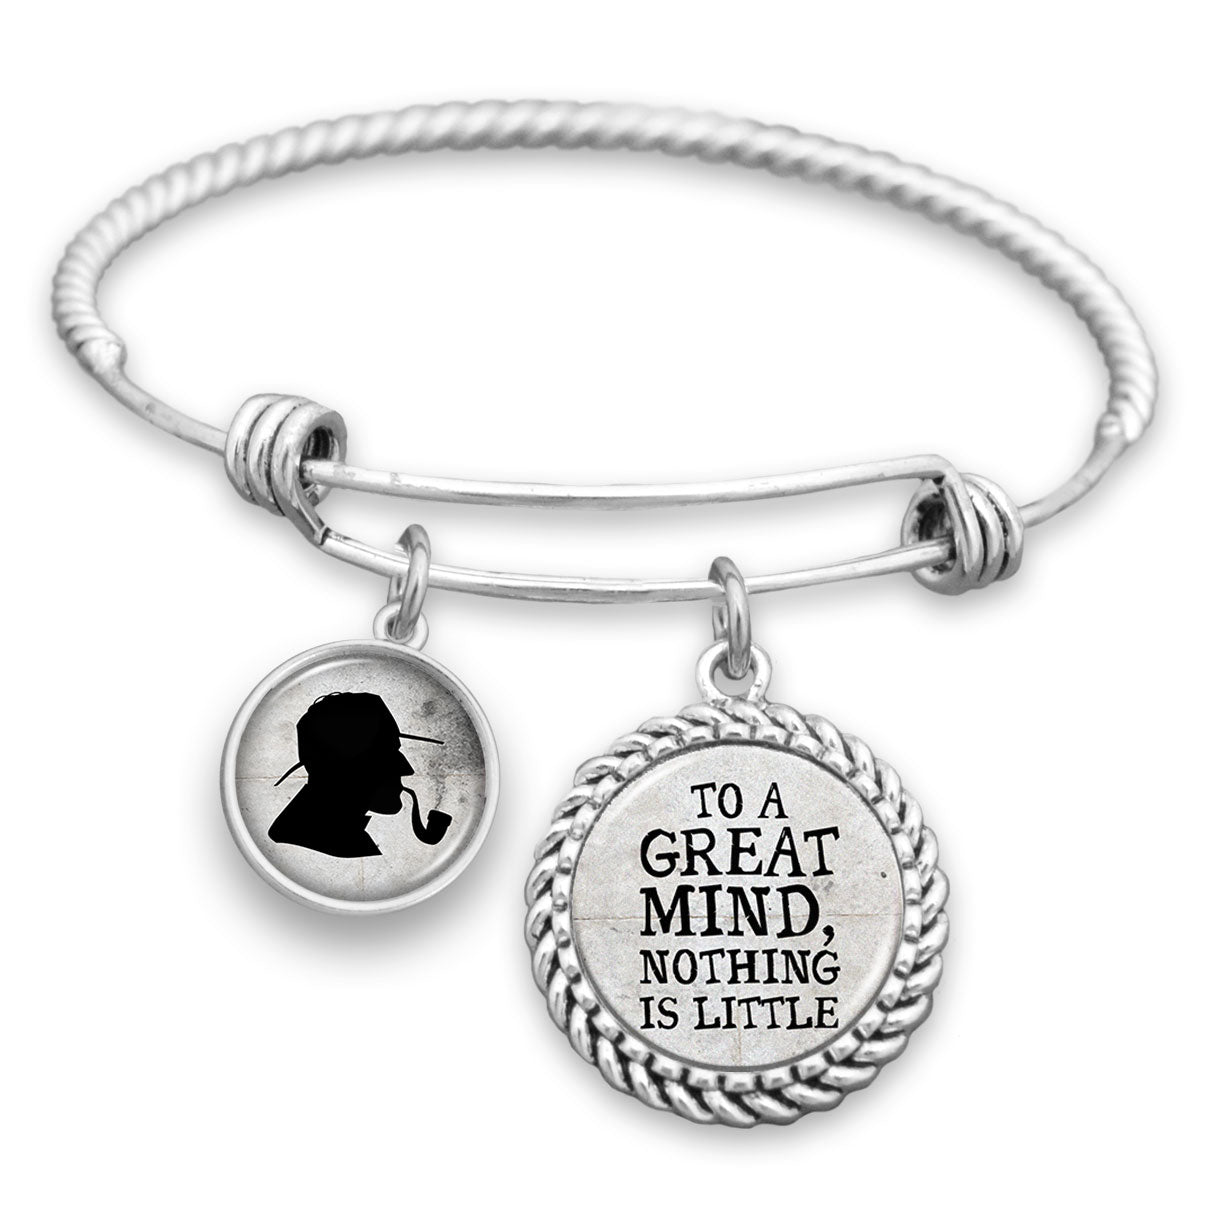 To A Great Mind, Nothing Is Little Charm Bracelet